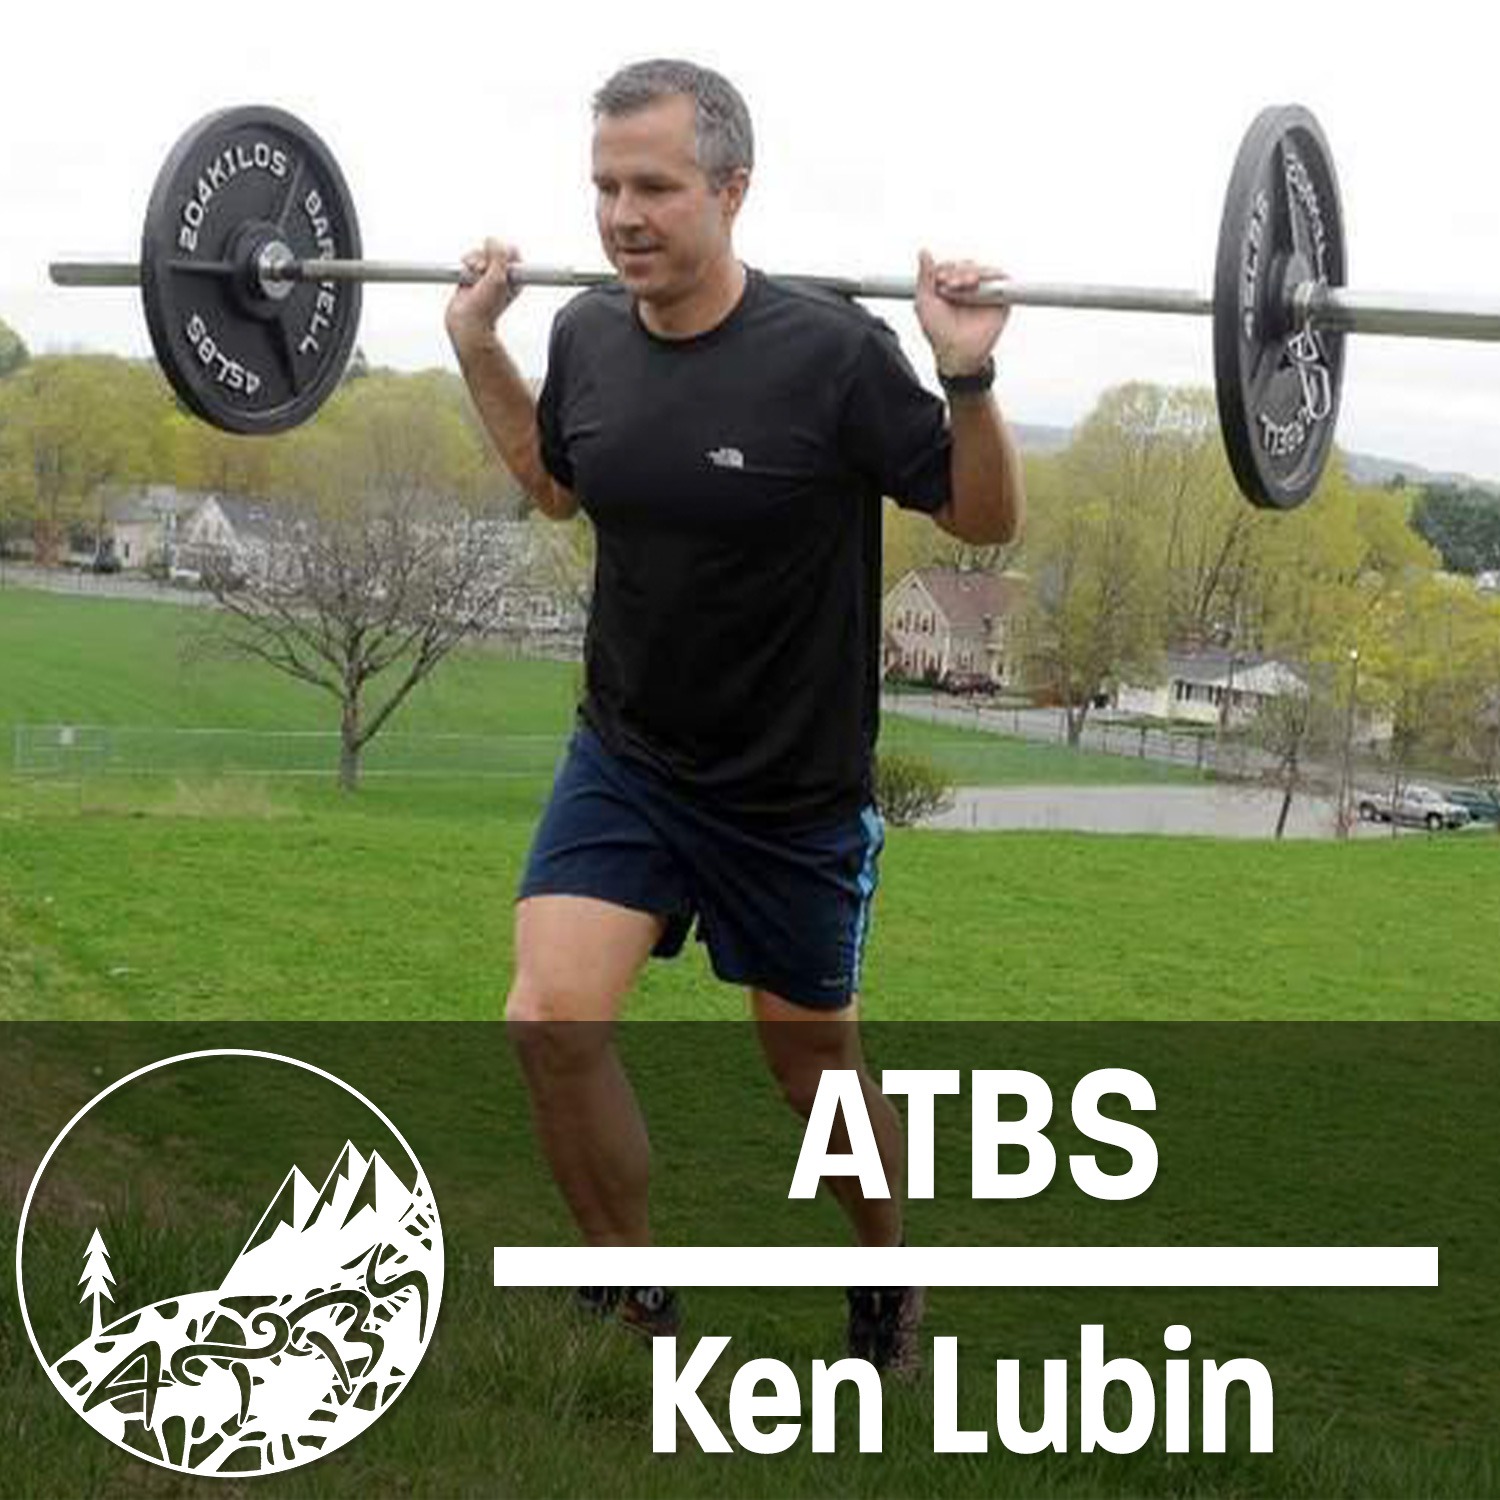 How to Learn Anything: The Beginners Mindset - With Ken Lubin - ATBS #38